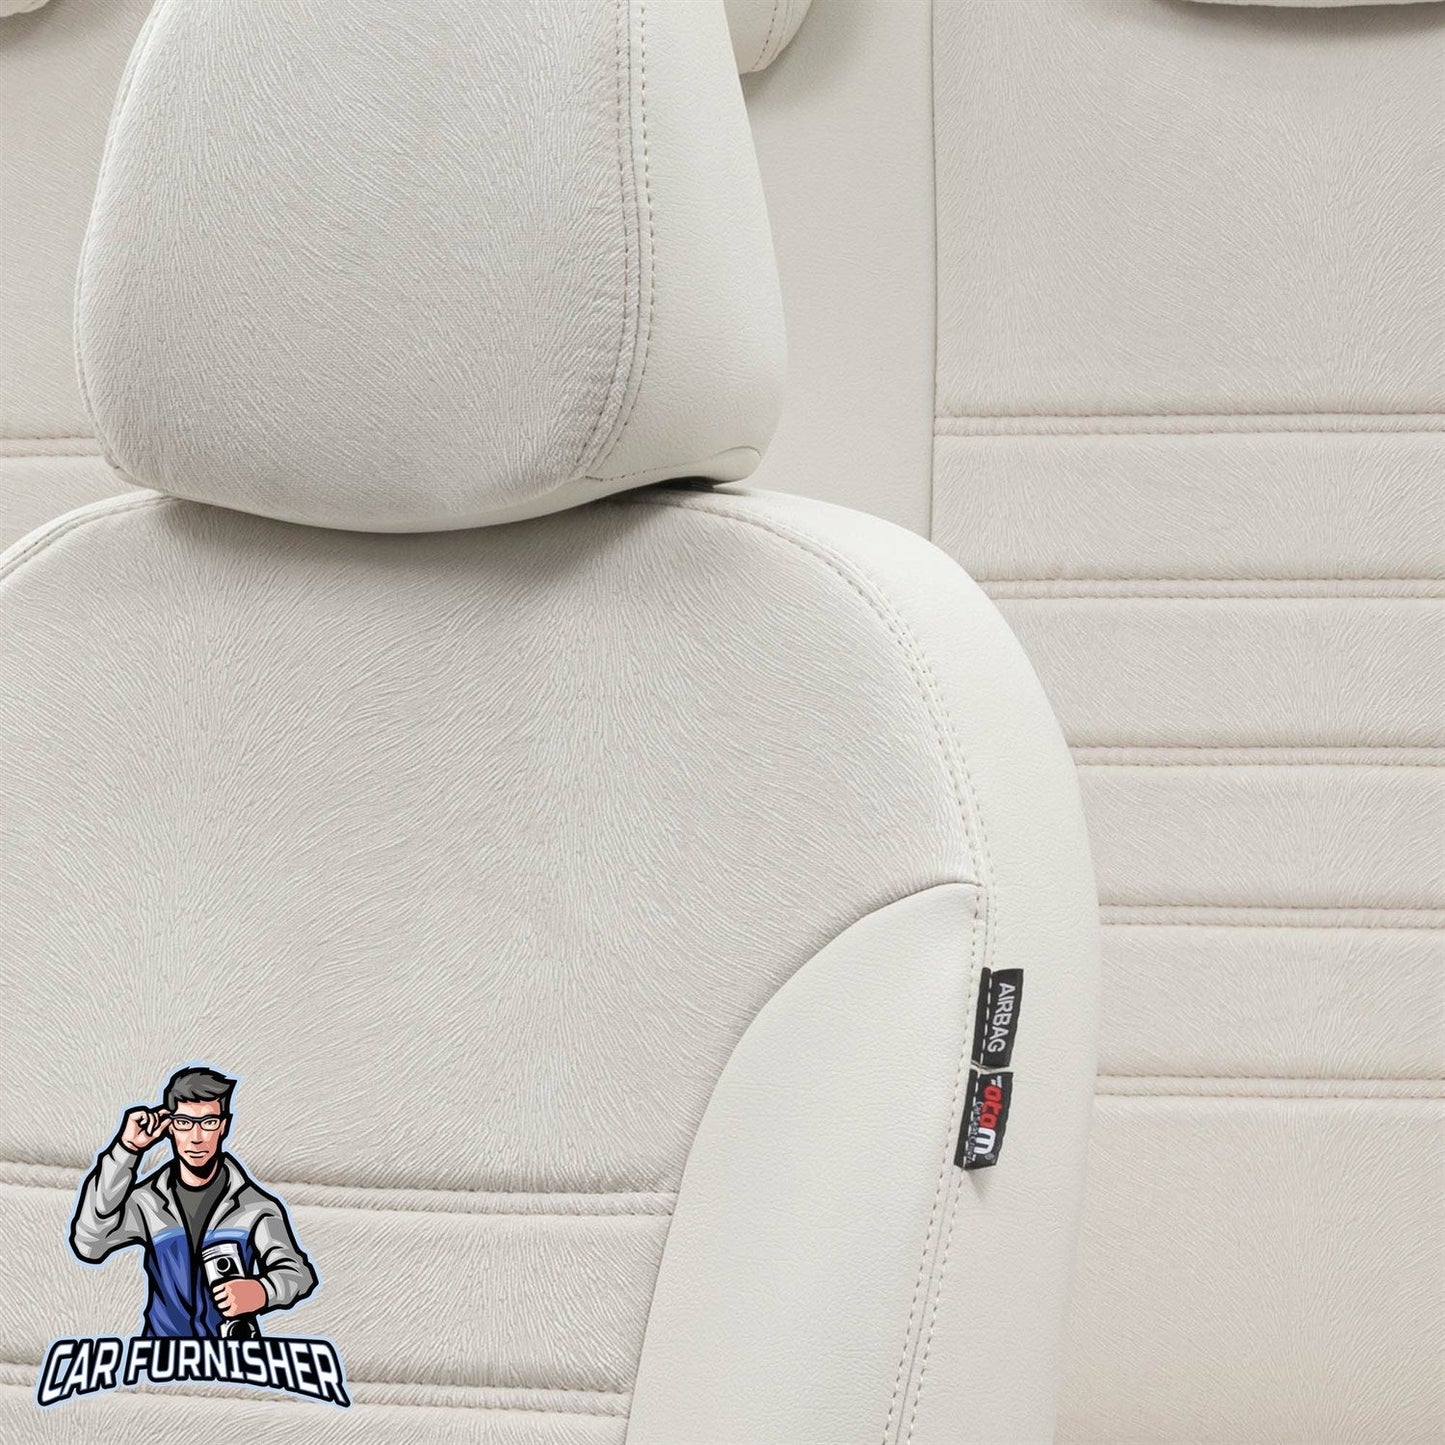 Seat Ibiza Seat Covers London Foal Feather Design Ivory Leather & Foal Feather